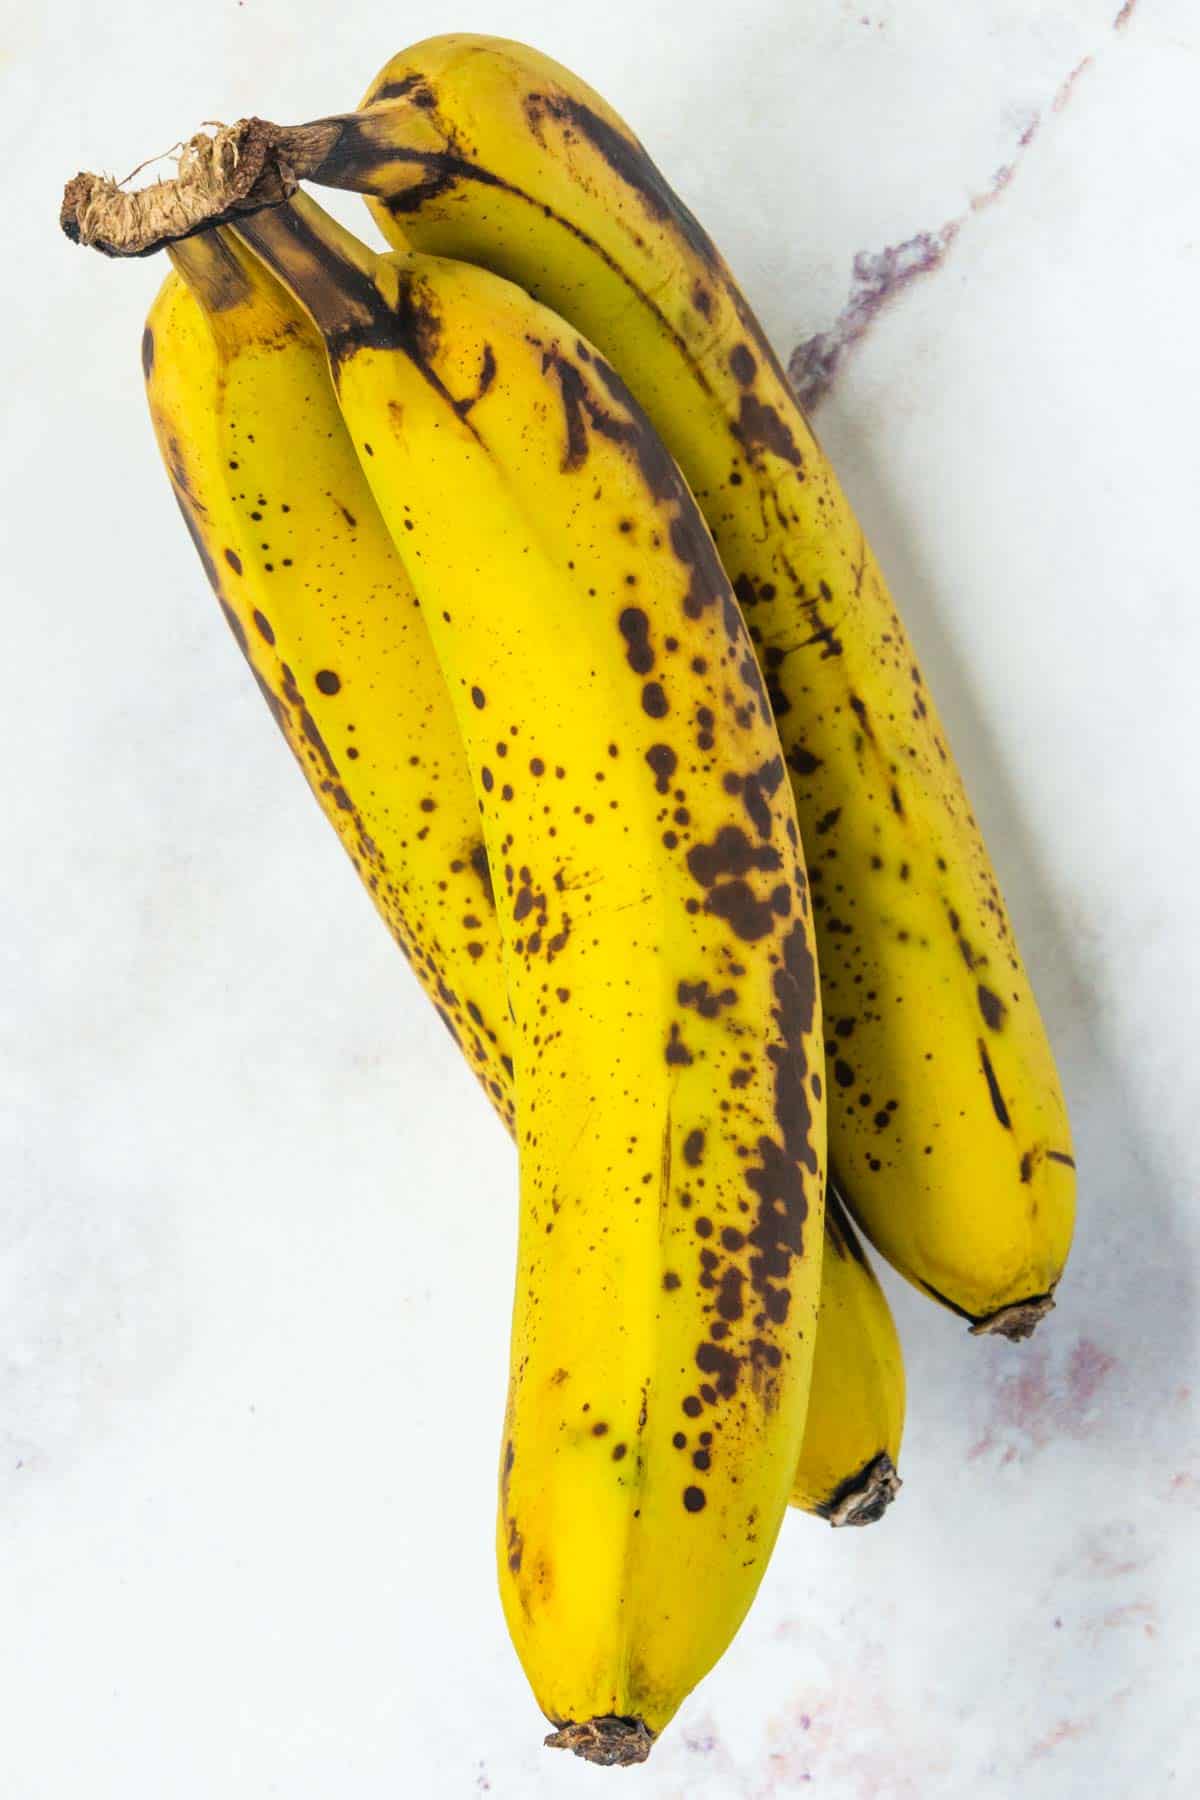 A bunch of three slightly spotted bananas sitting on the countertop